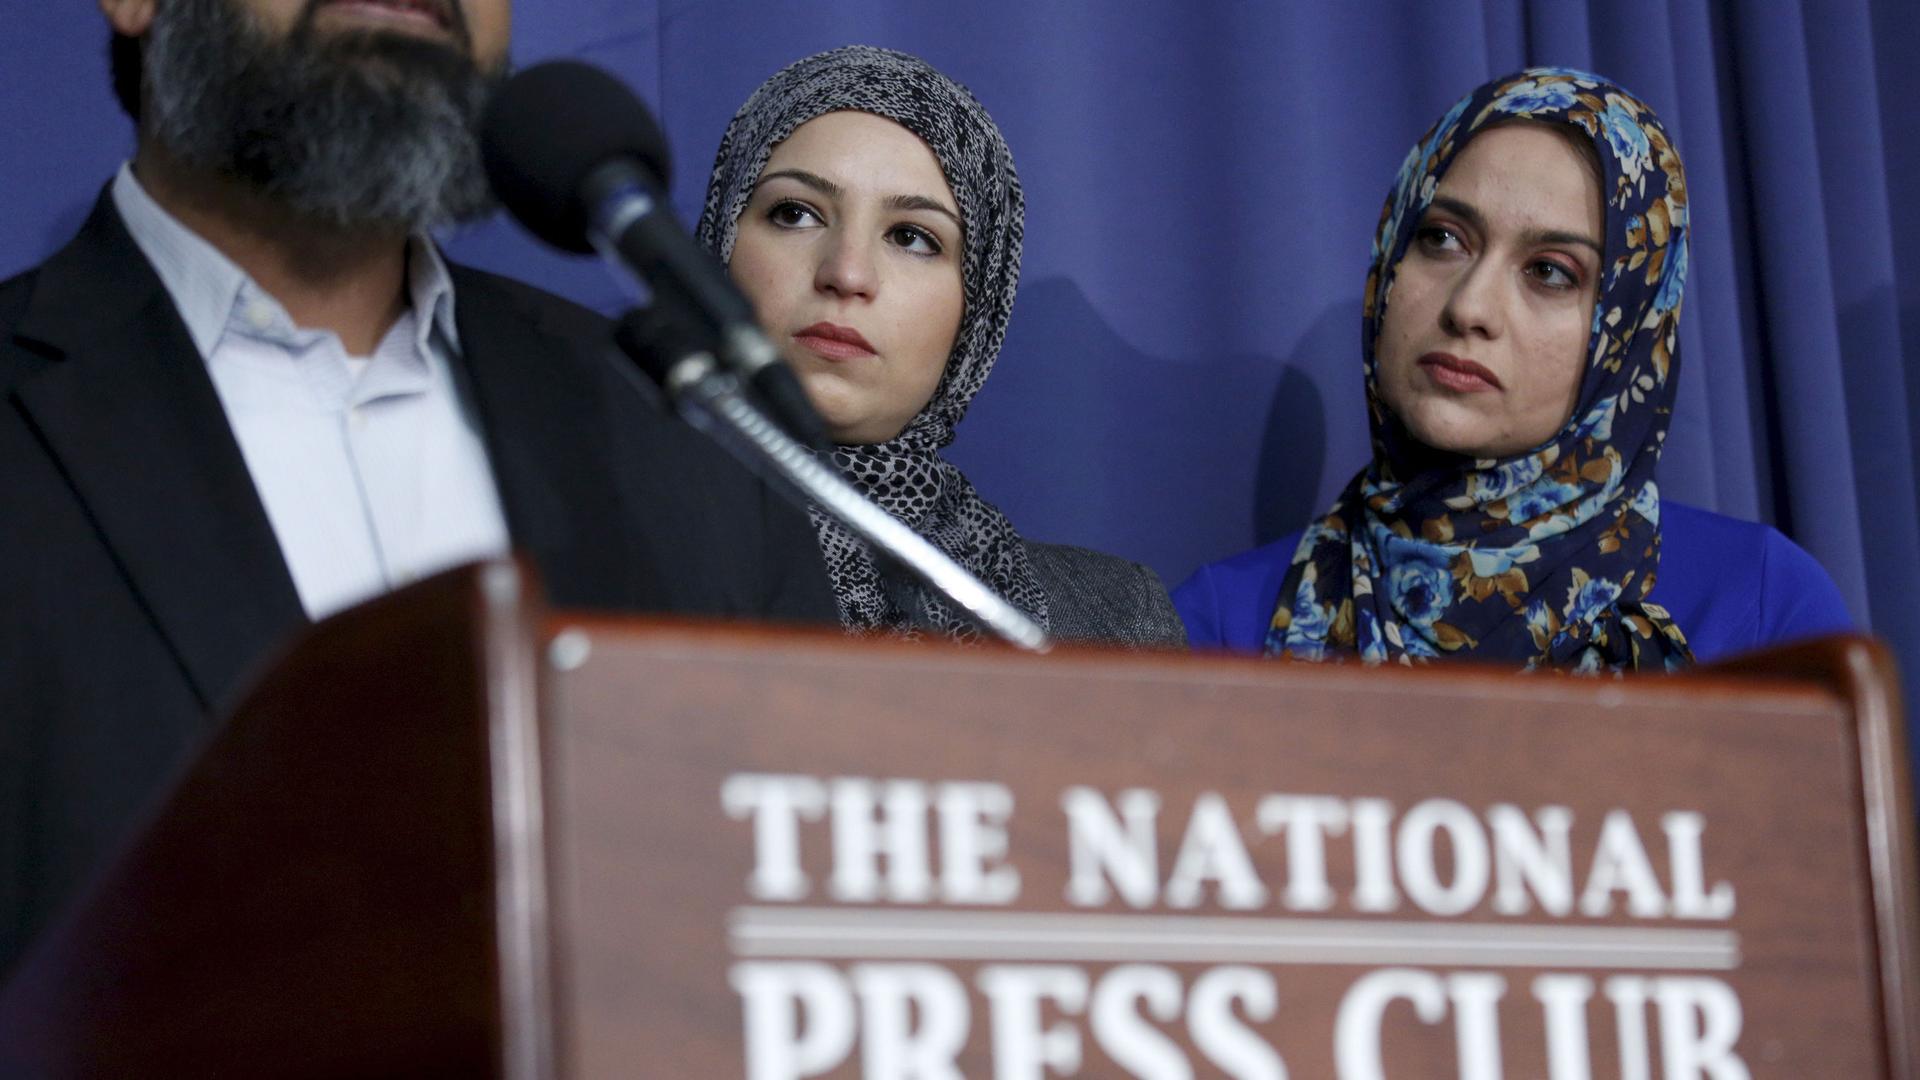 Two women wearing head scarves watch a man at a podium. 